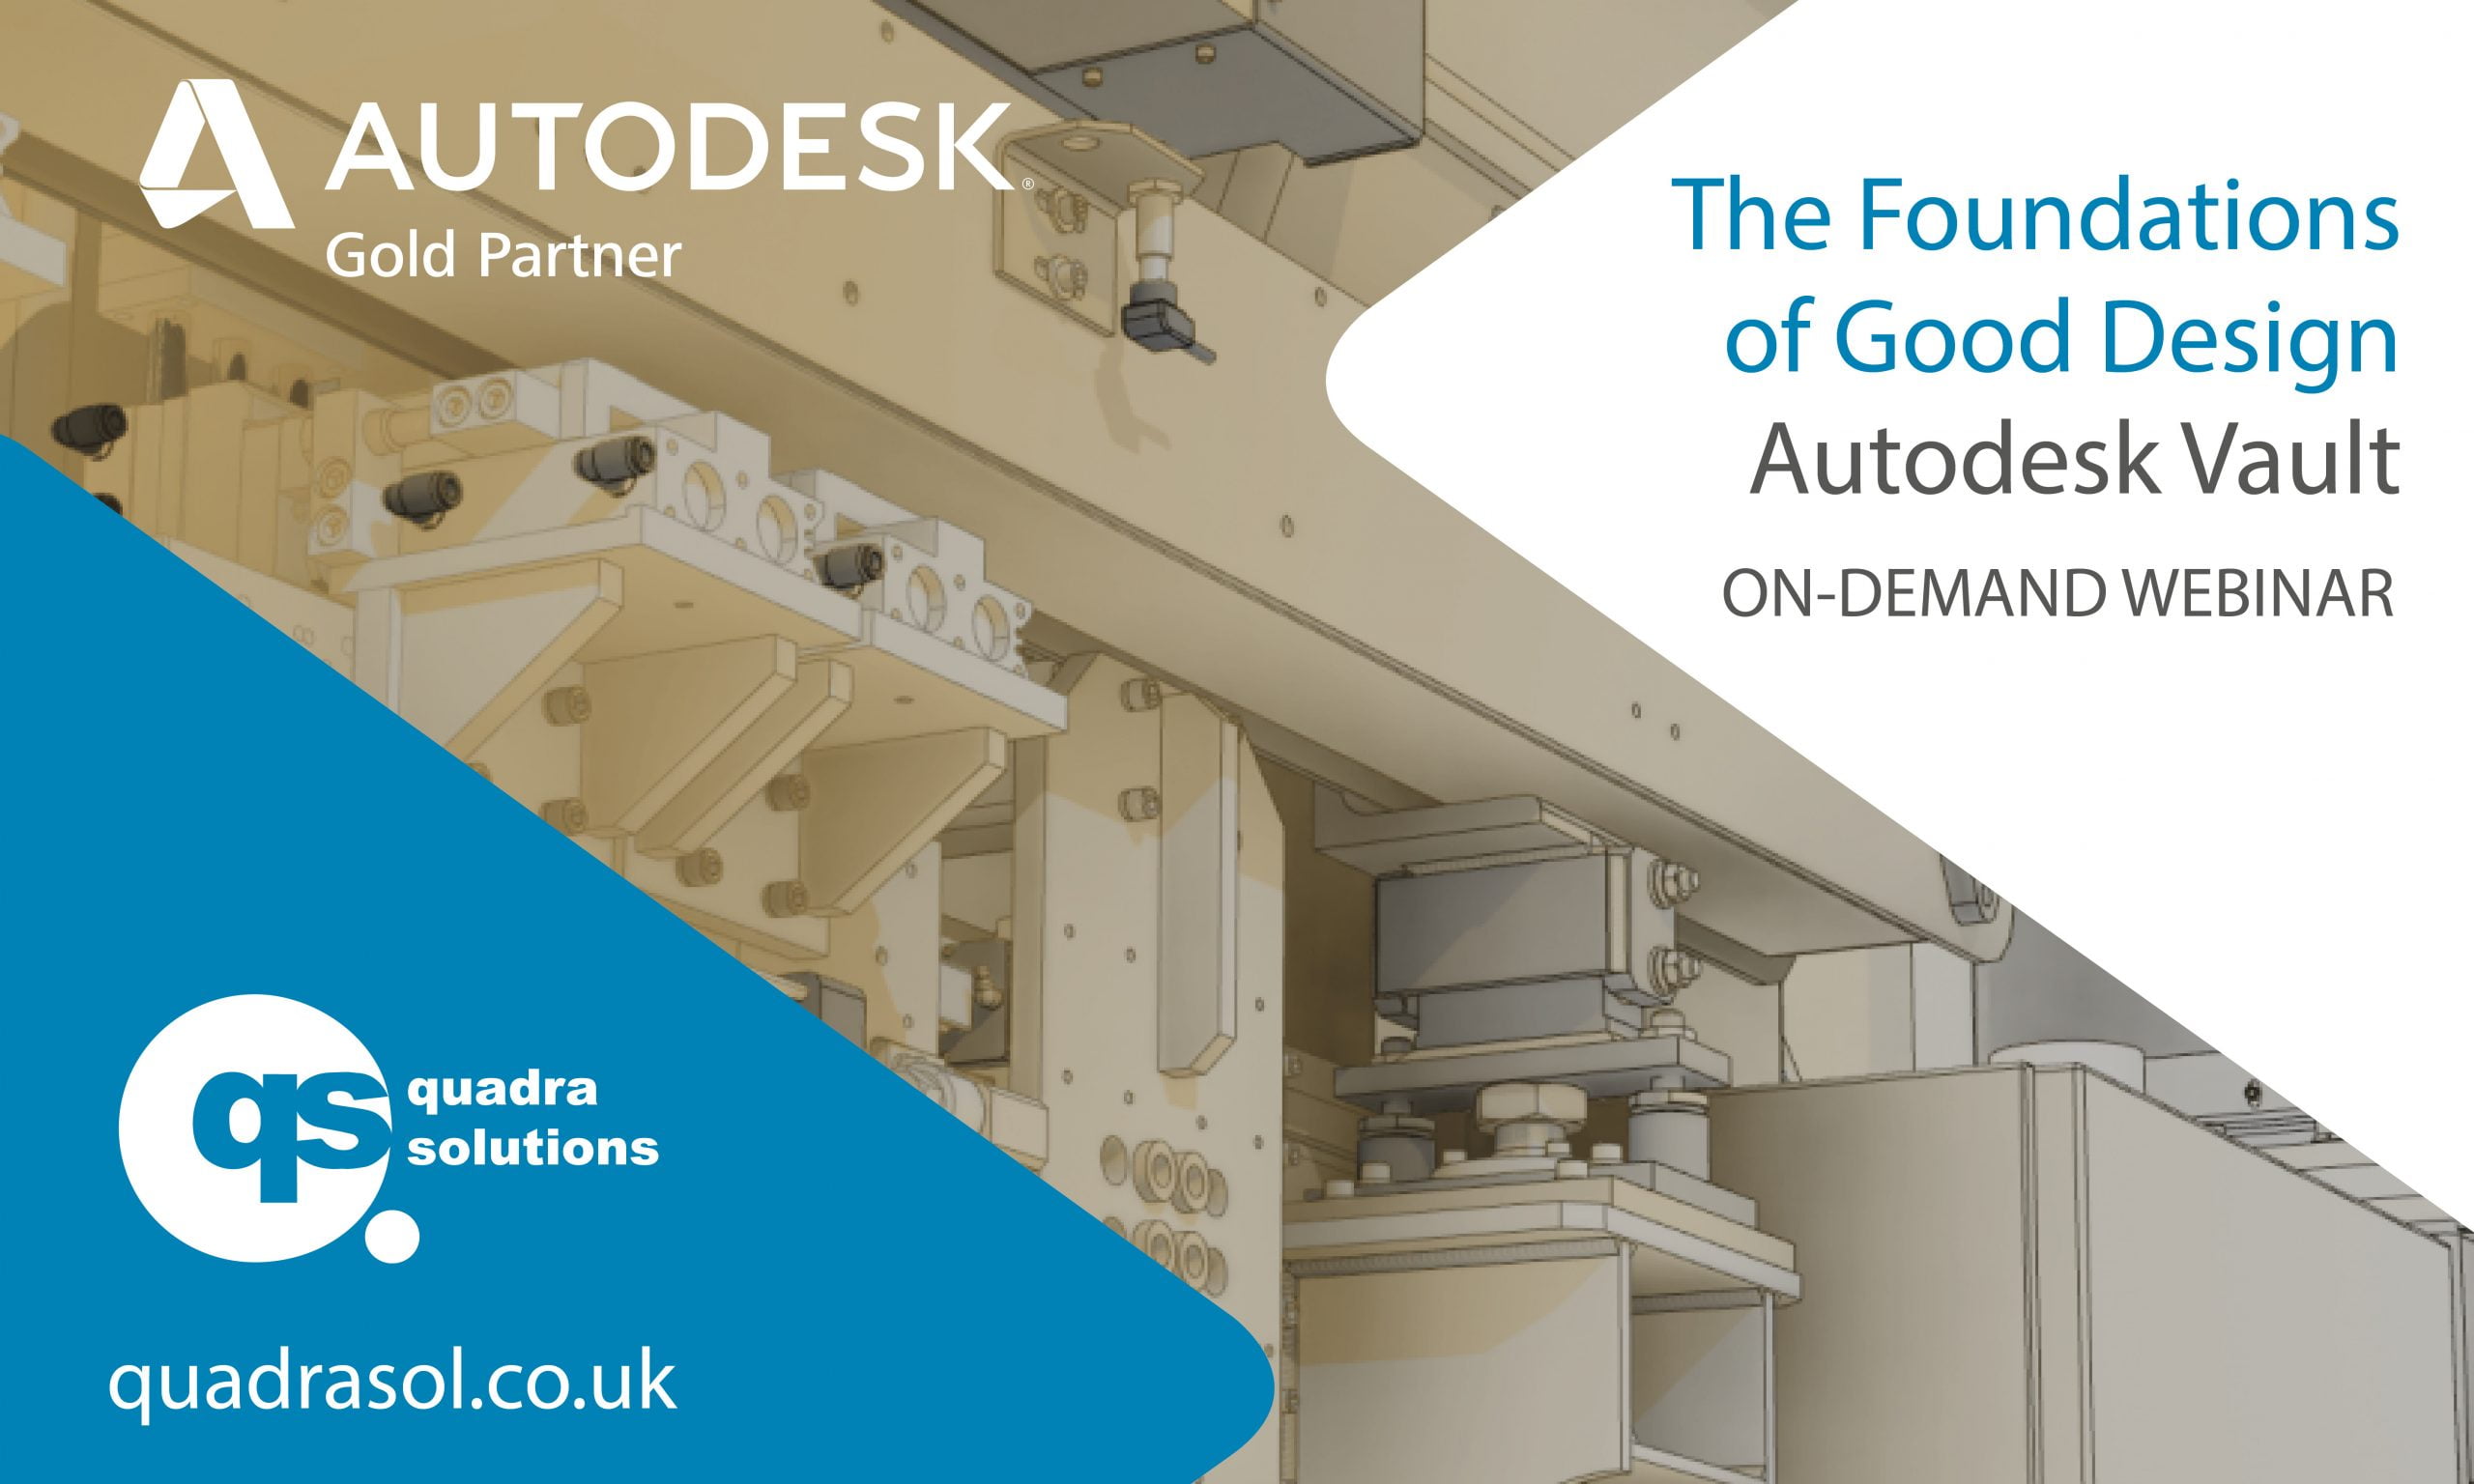 The Foundations of Good Design with Autodesk Vault